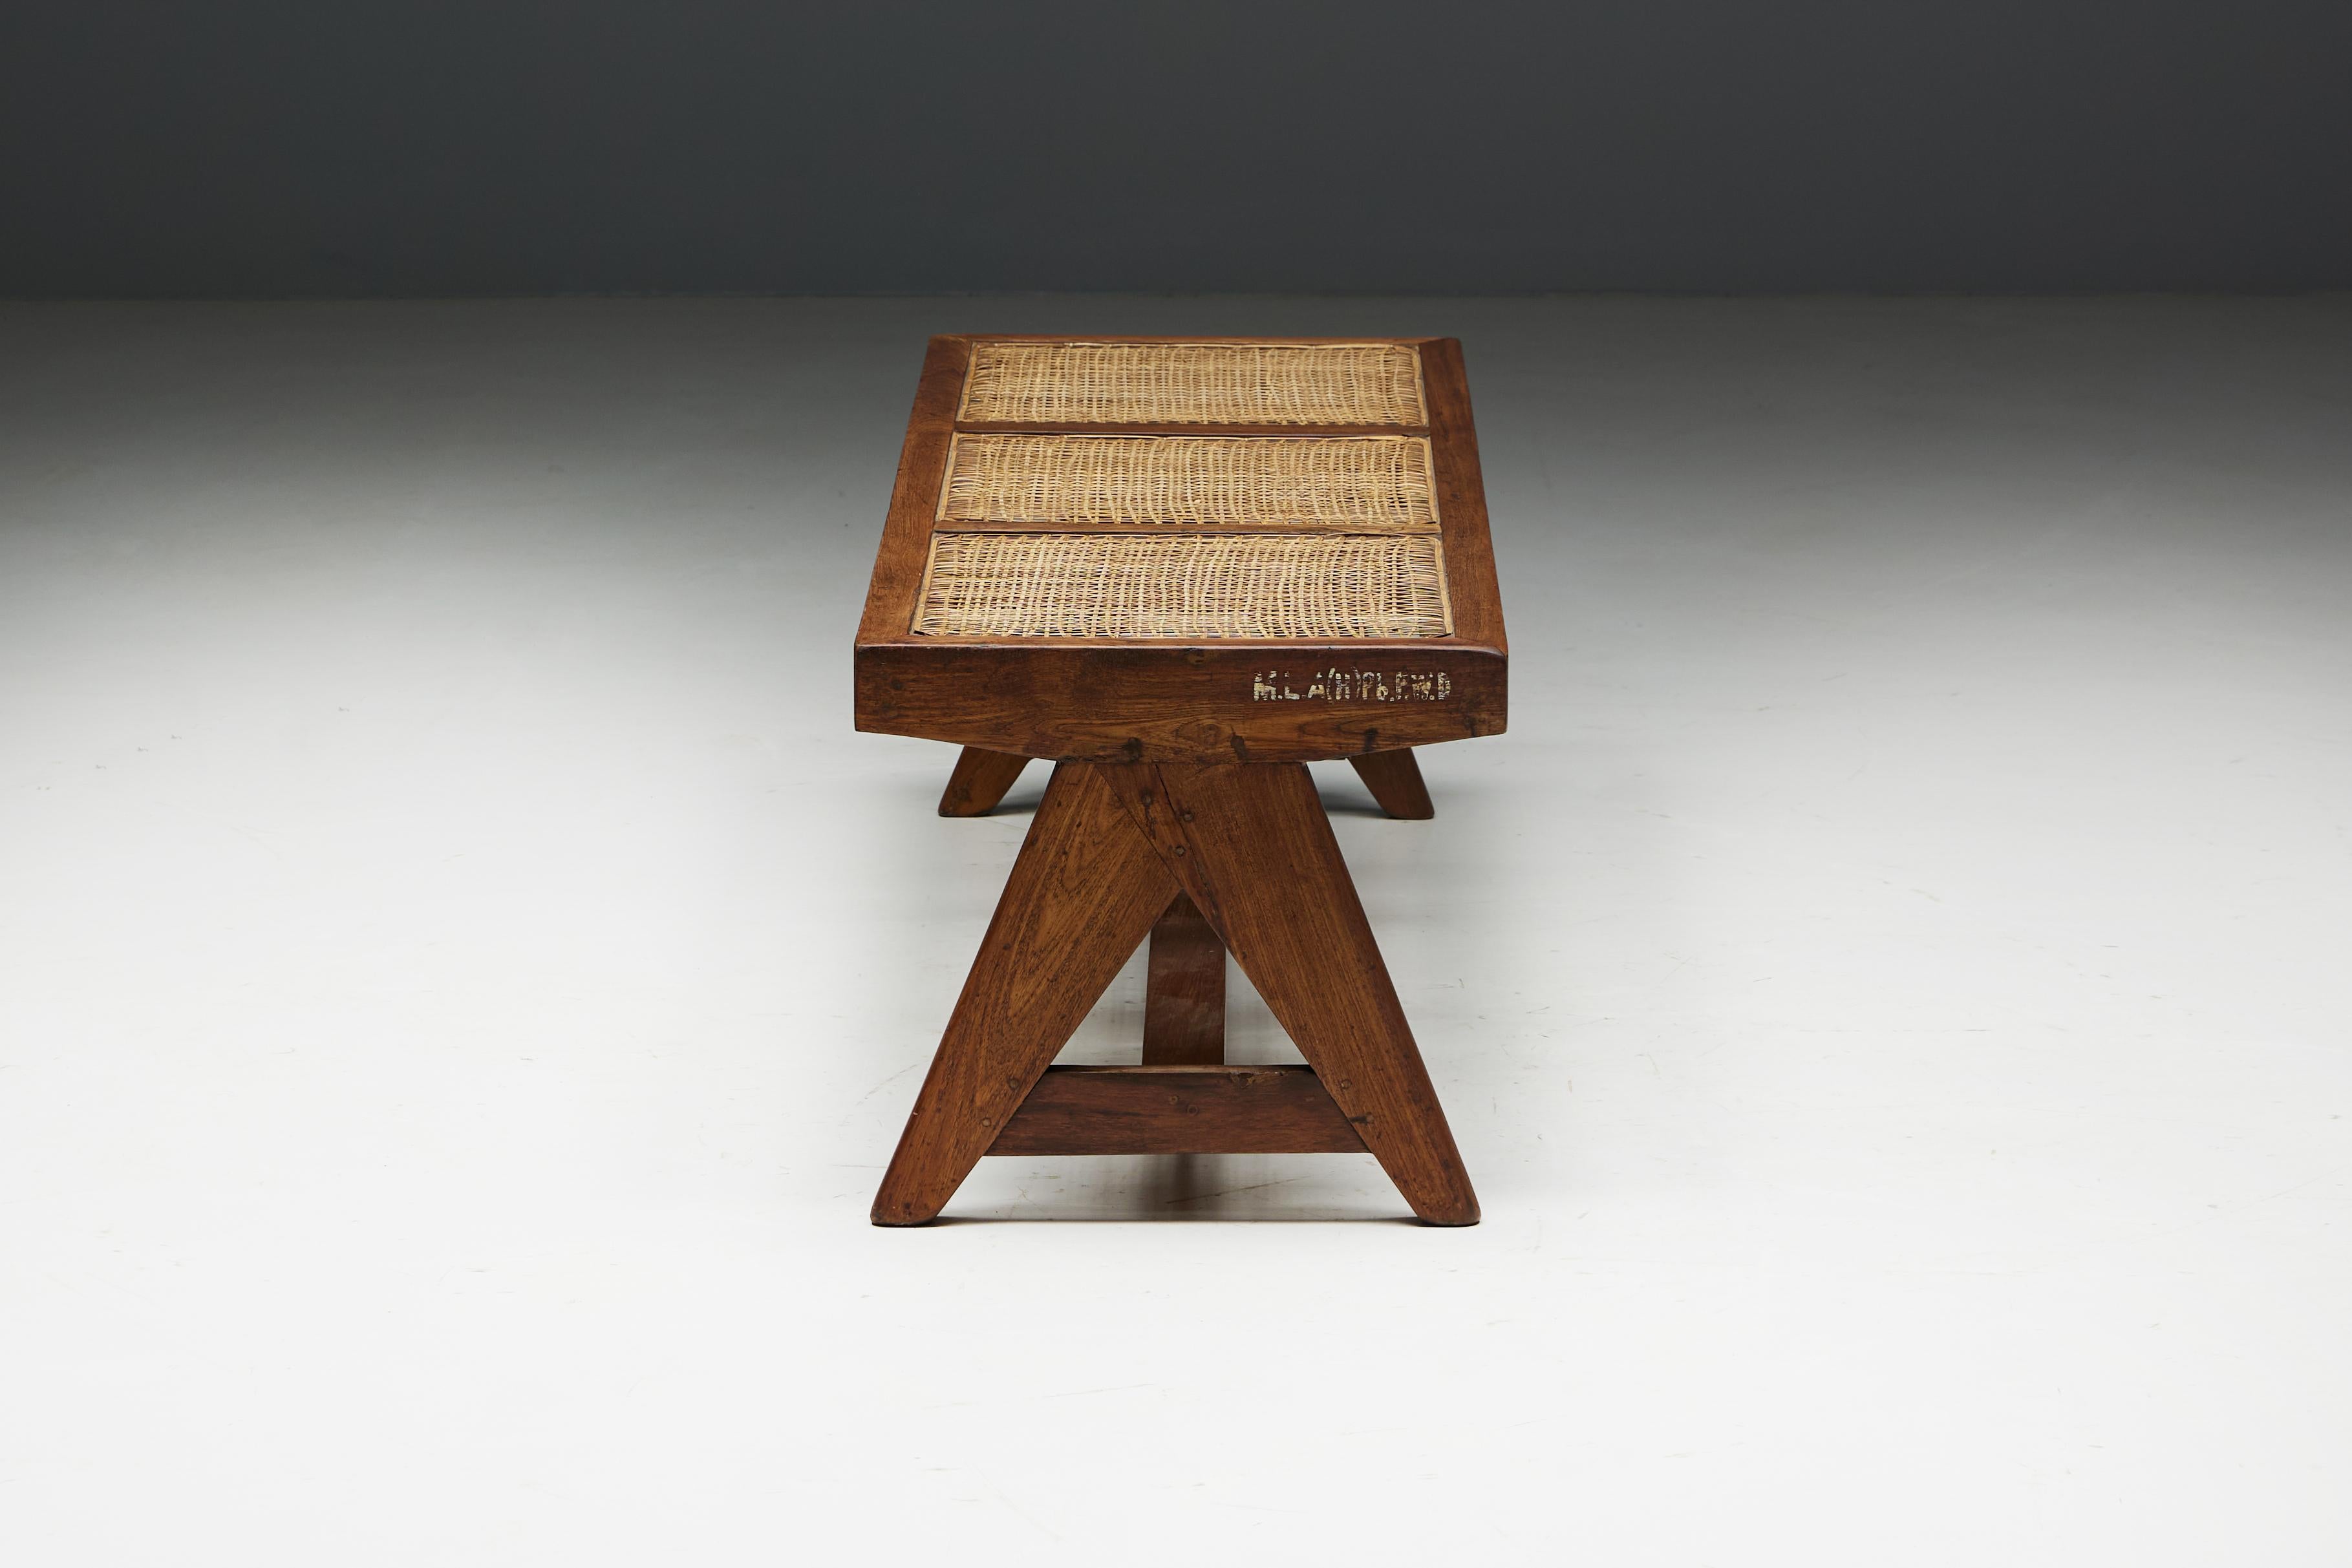 Teak Bench PJ-SI-33B by Pierre Jeanneret, India, 1950s For Sale 5